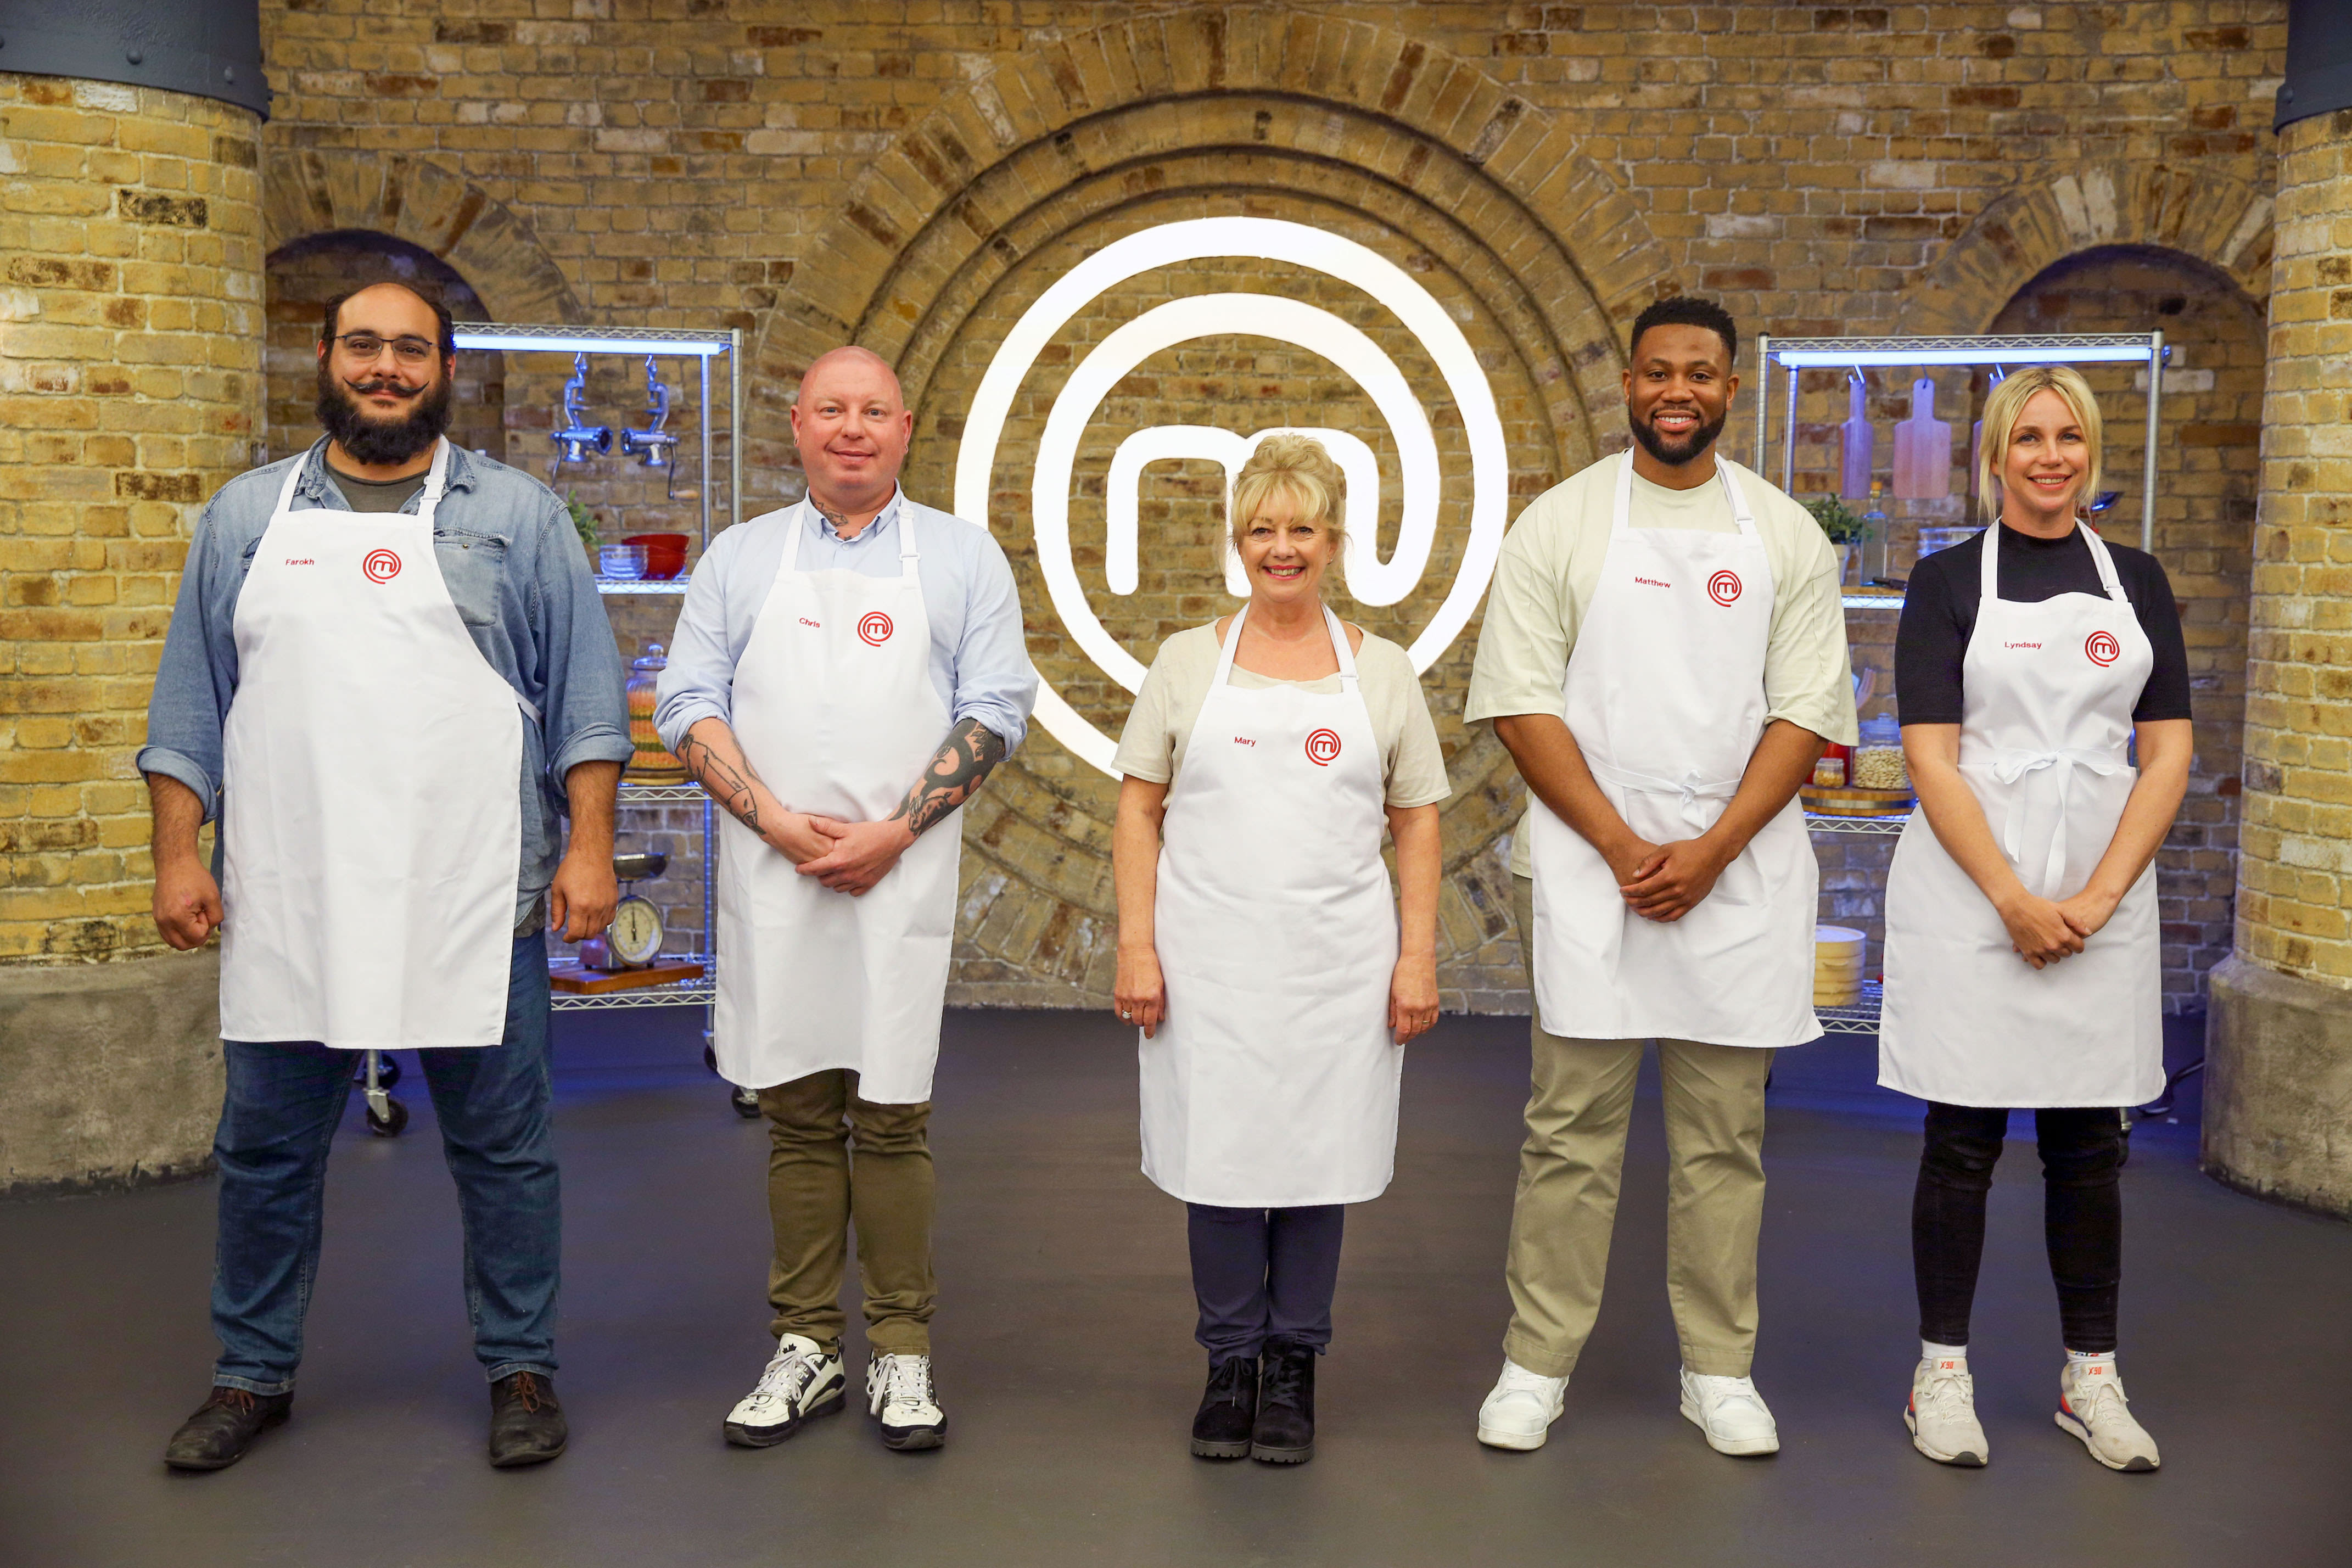 MasterChef viewers call out twist that saw former 'losers' given second chance